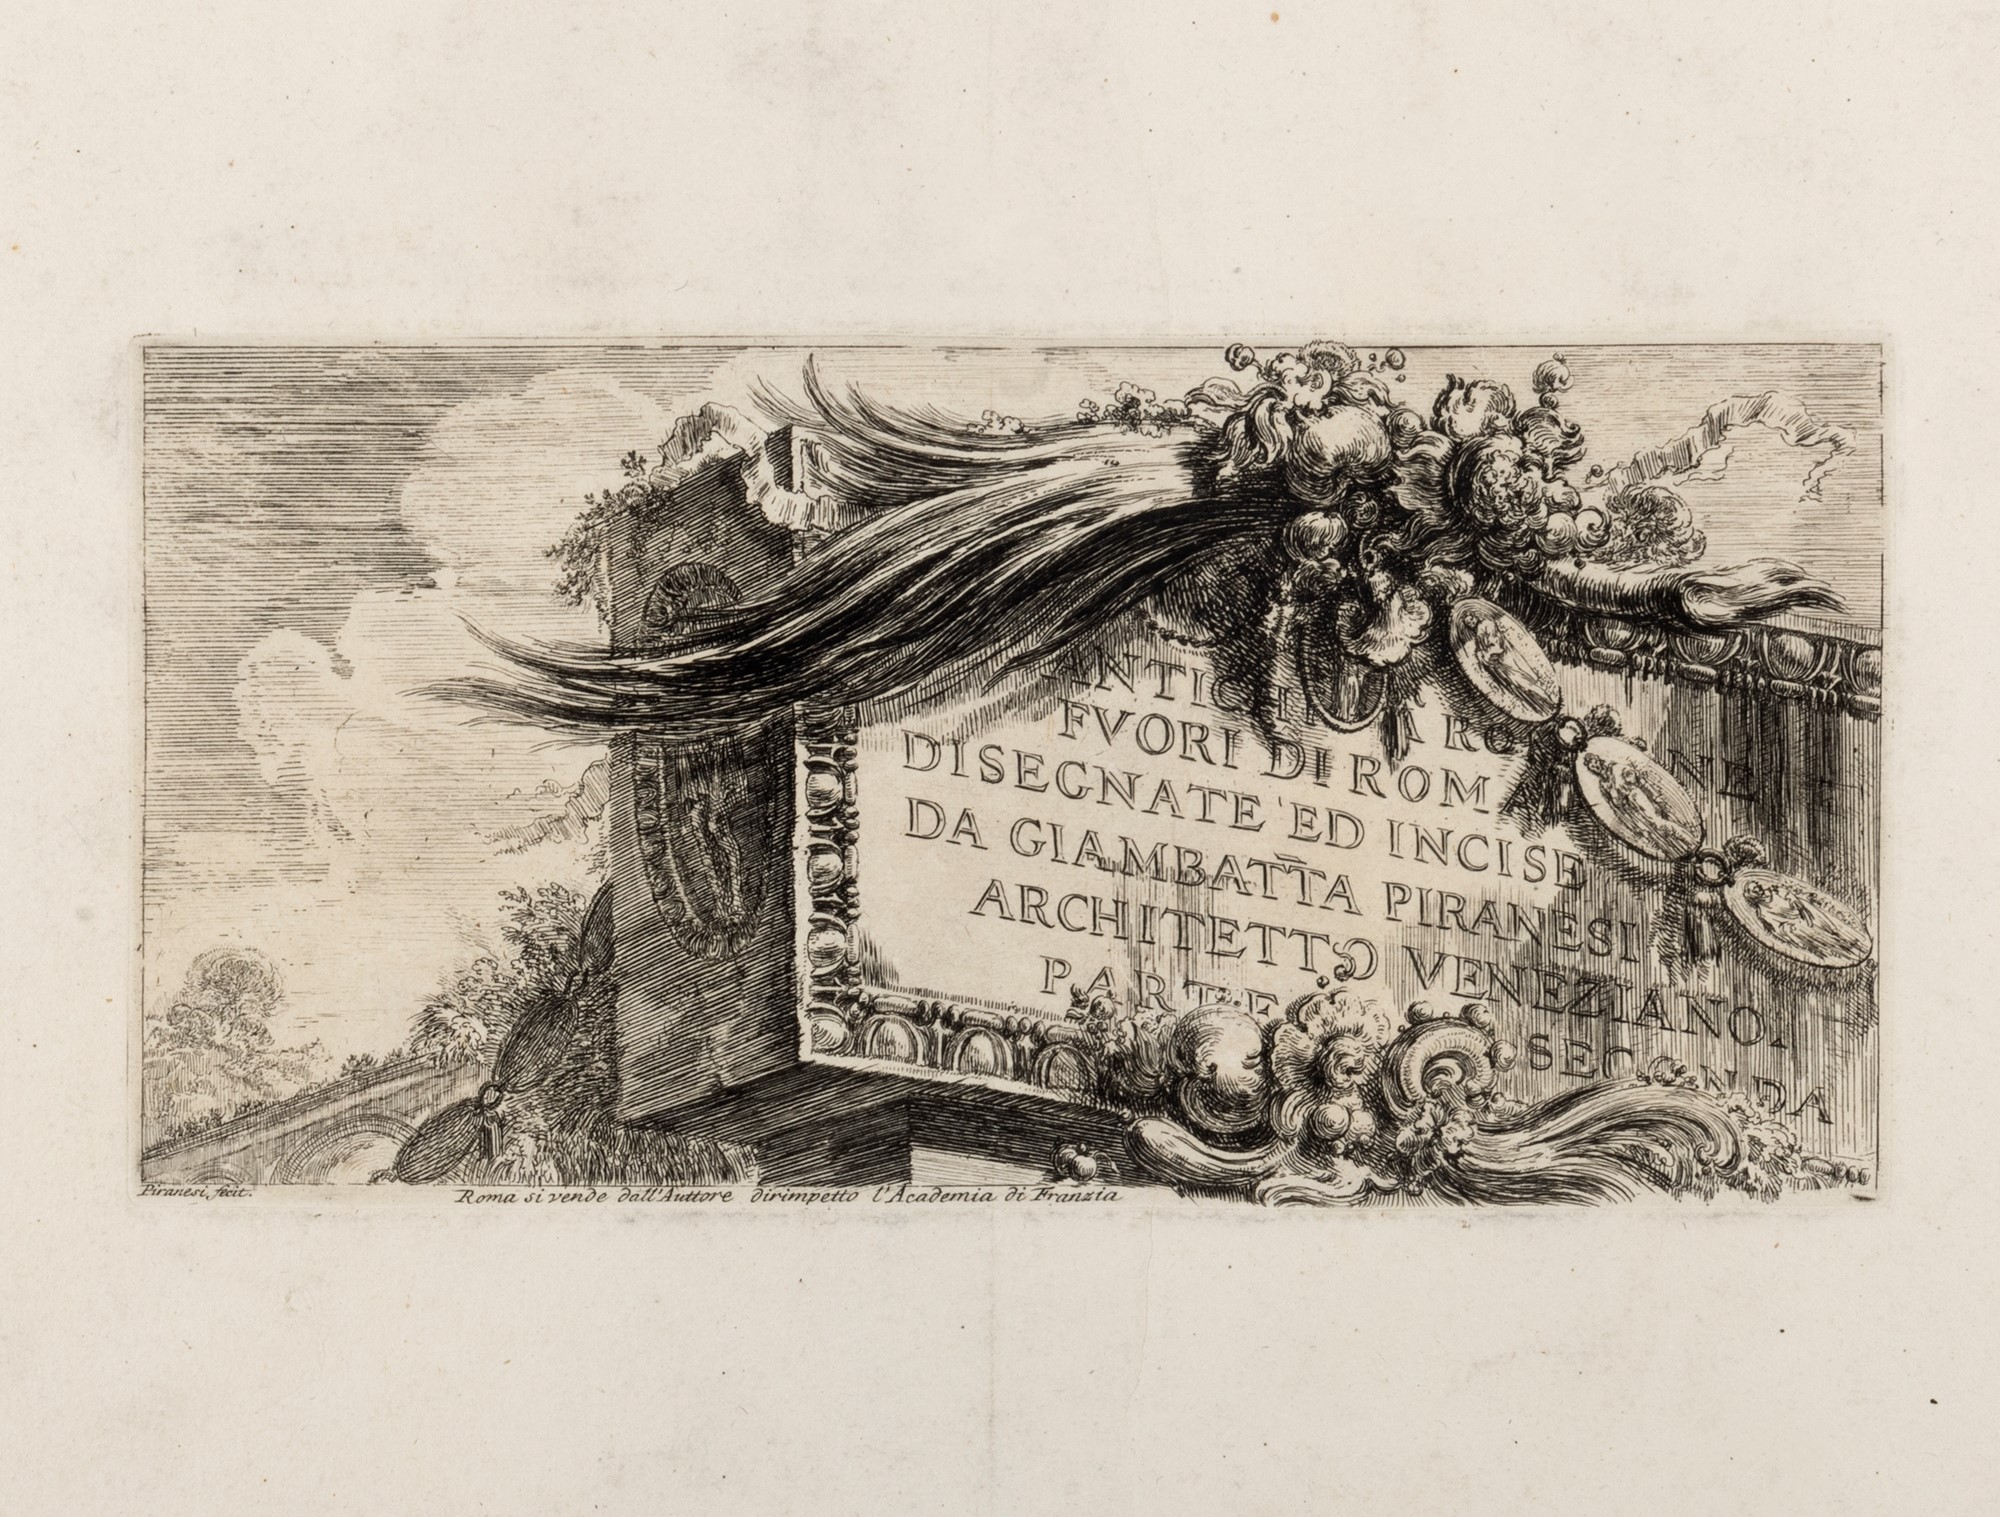 Engravings - Piranesi, Giovanni Battista - Roman antiquities outside Rome drawn and engraved by Giam